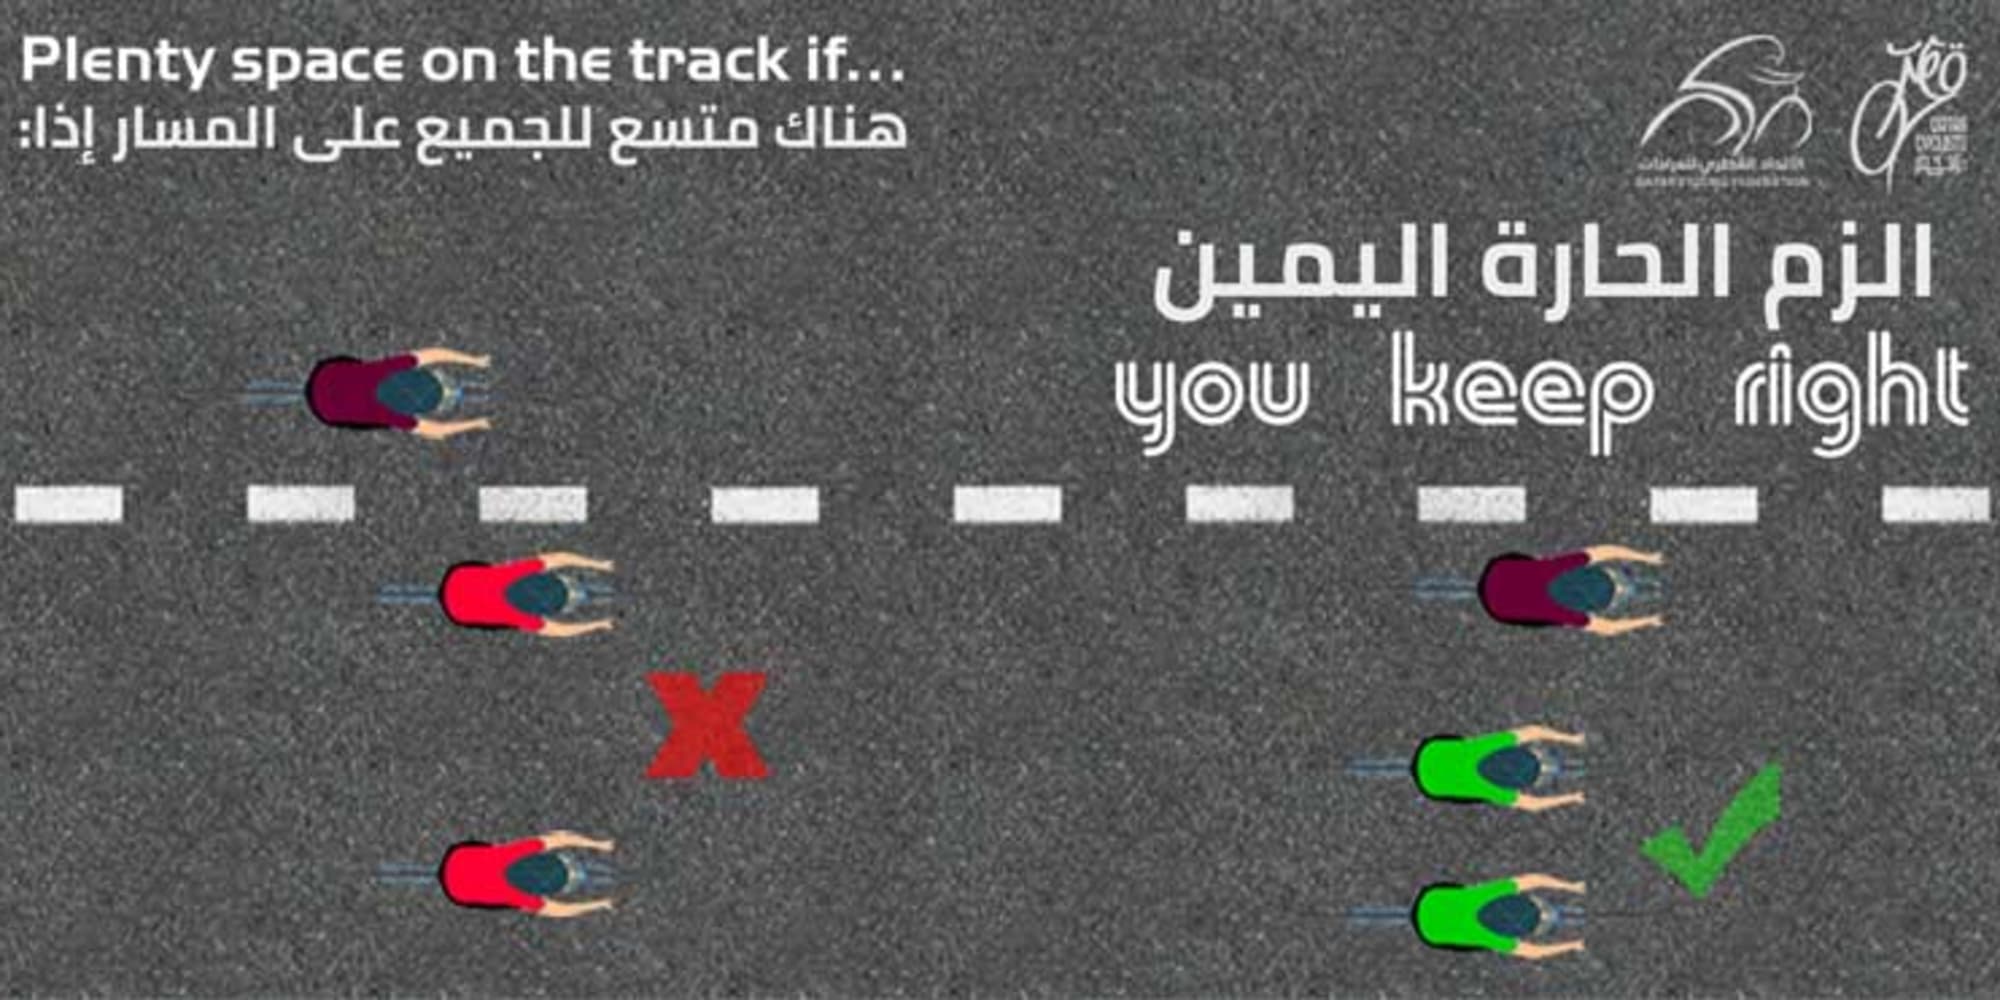 Olympic Cycling Track Safety Campaign